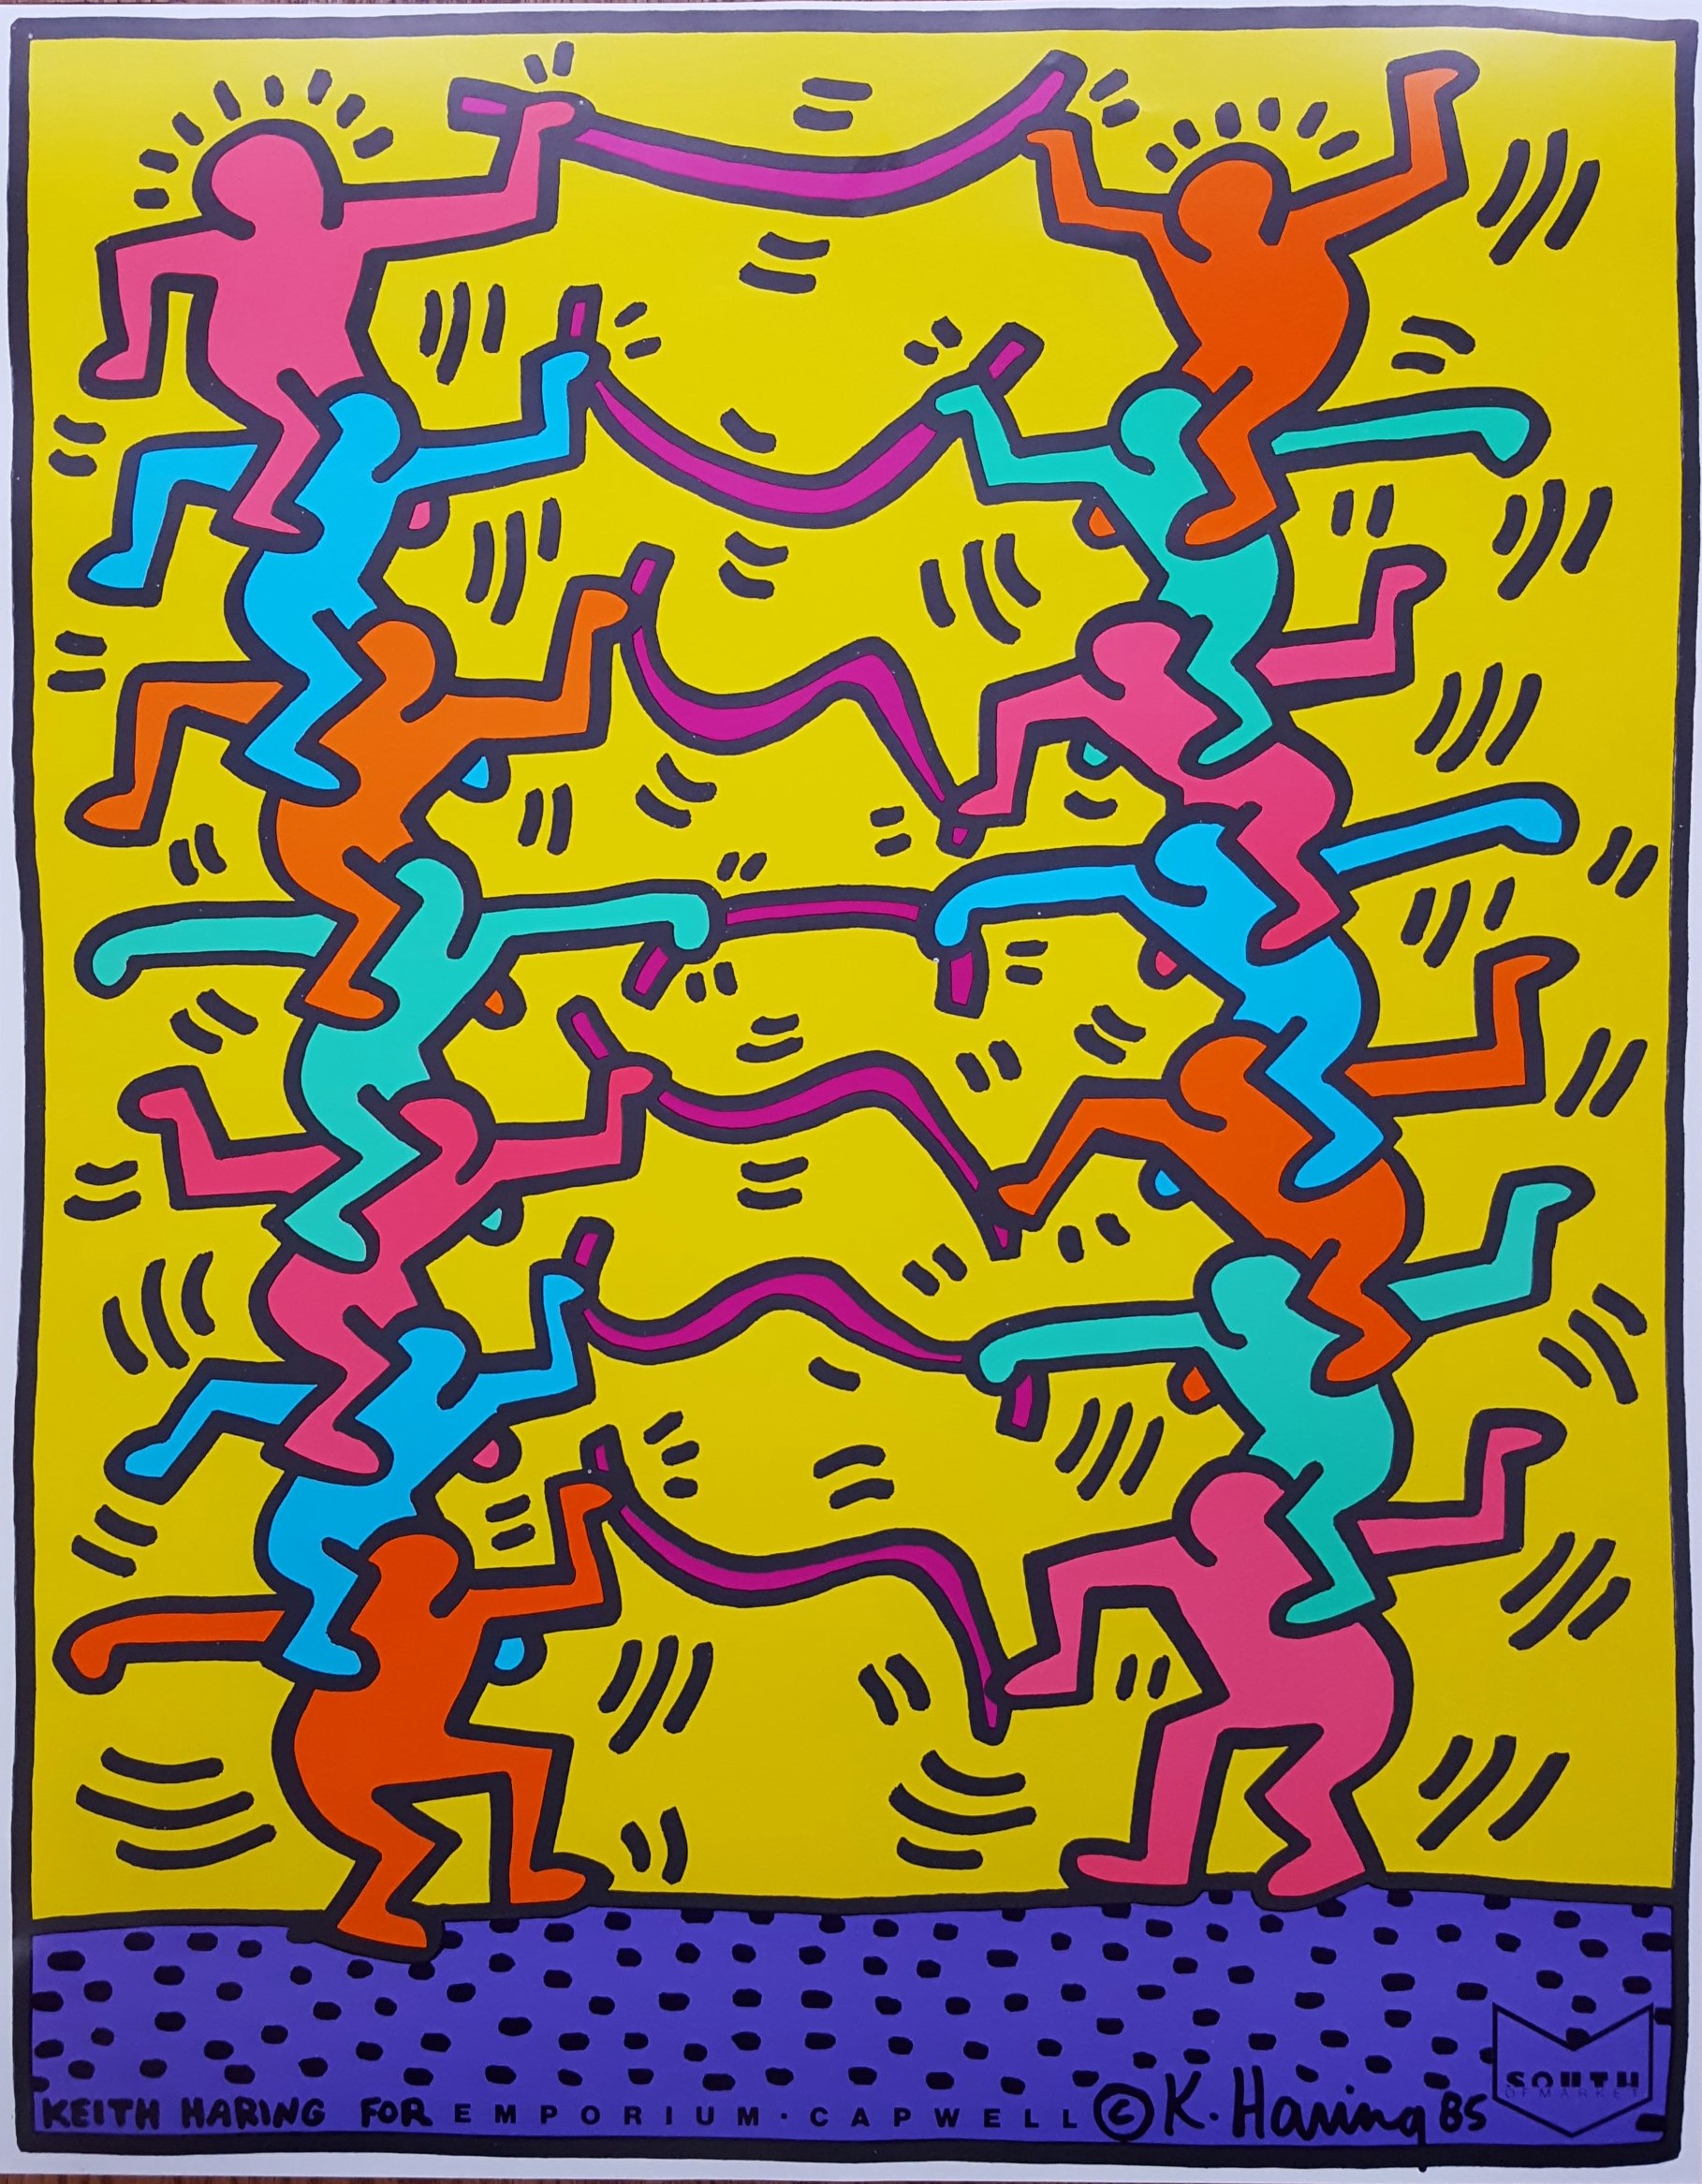 Images Of Keith Haring Art - www.inf-inet.com